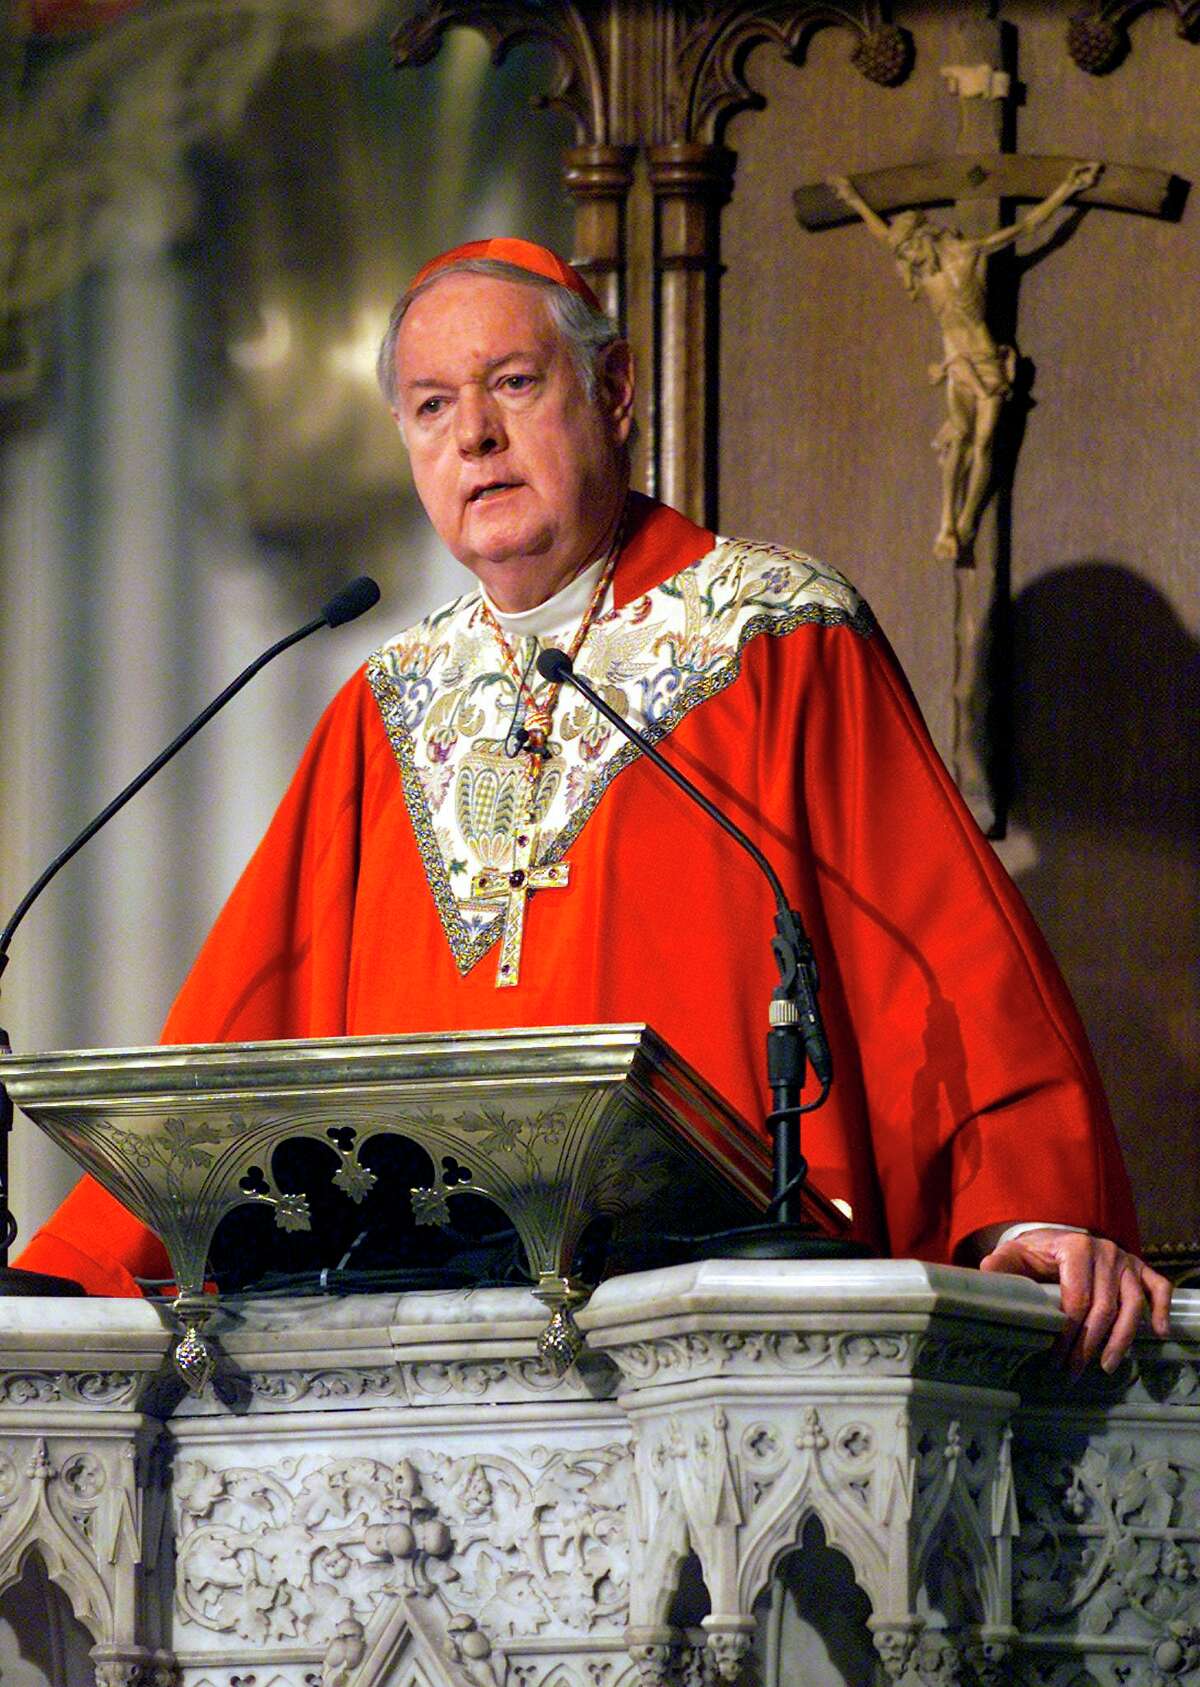 Cardinal Edward Egan of the New York archdiocese speaks during a Palm Sunday mass at St. Patrick’s Cathedral in New York City, March 24, 2002.